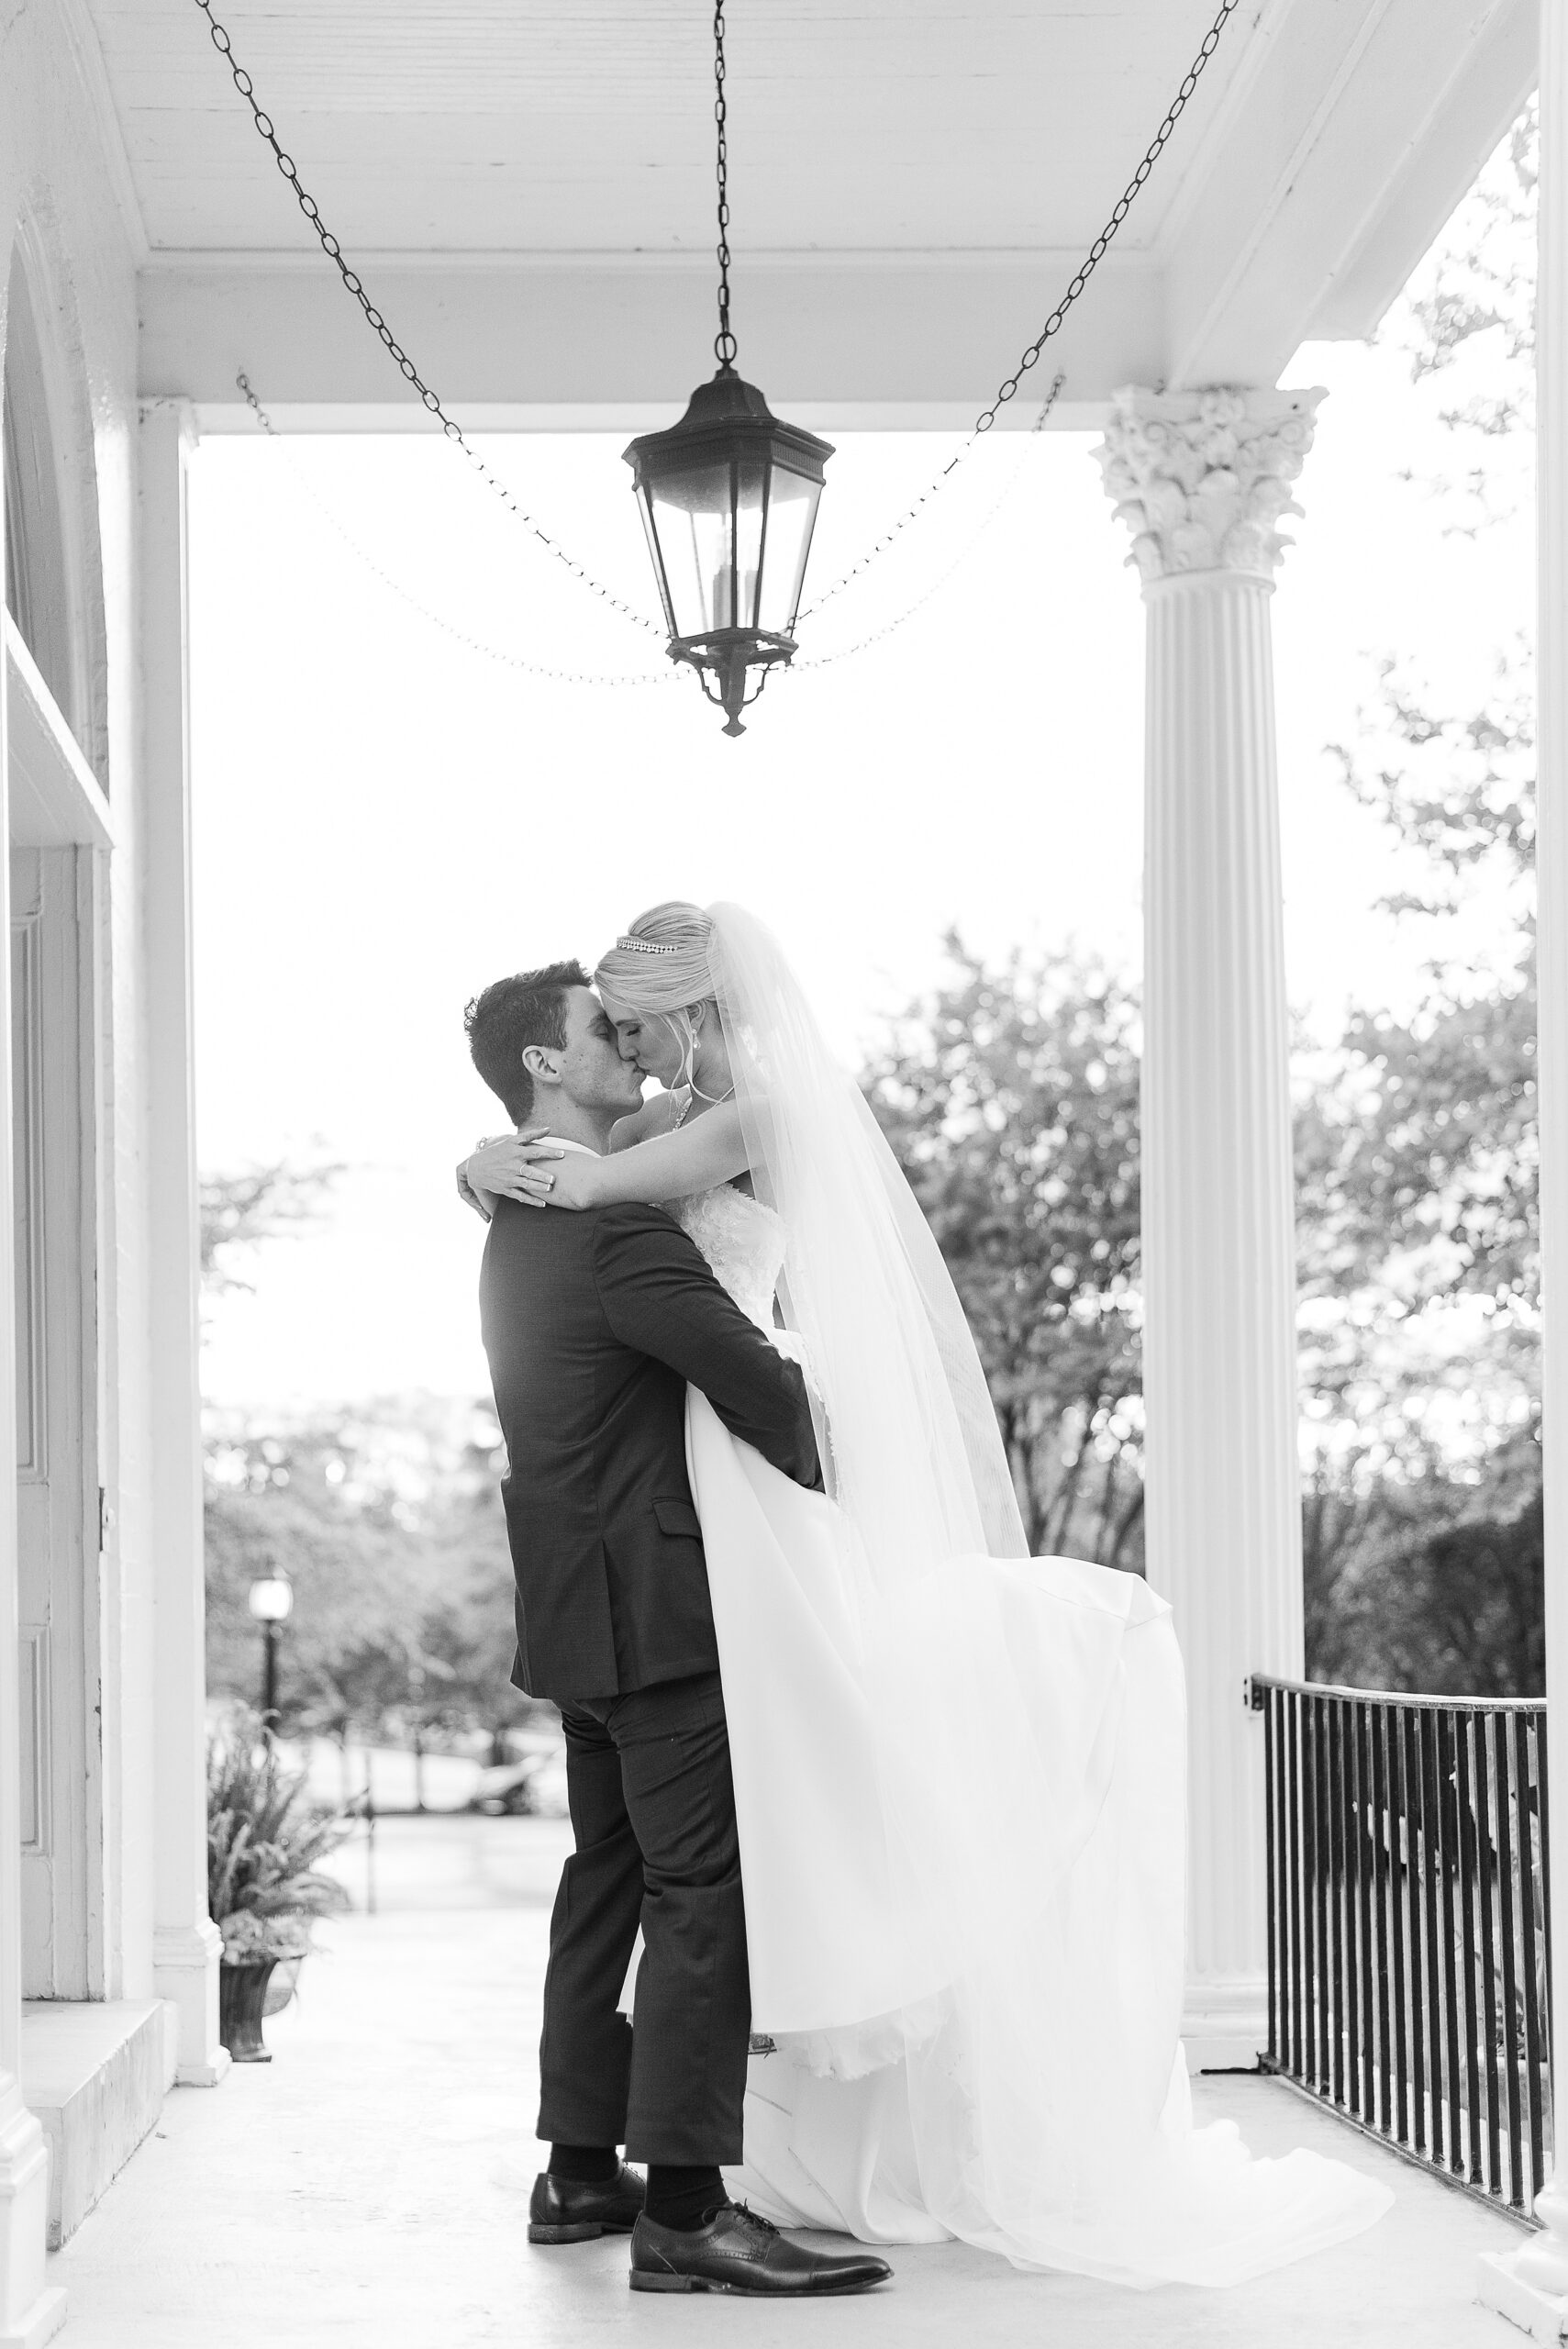 A groom lifts and kisses his bride on a white porch under a hanging light at their Sagamore Pendry Baltimore wedding